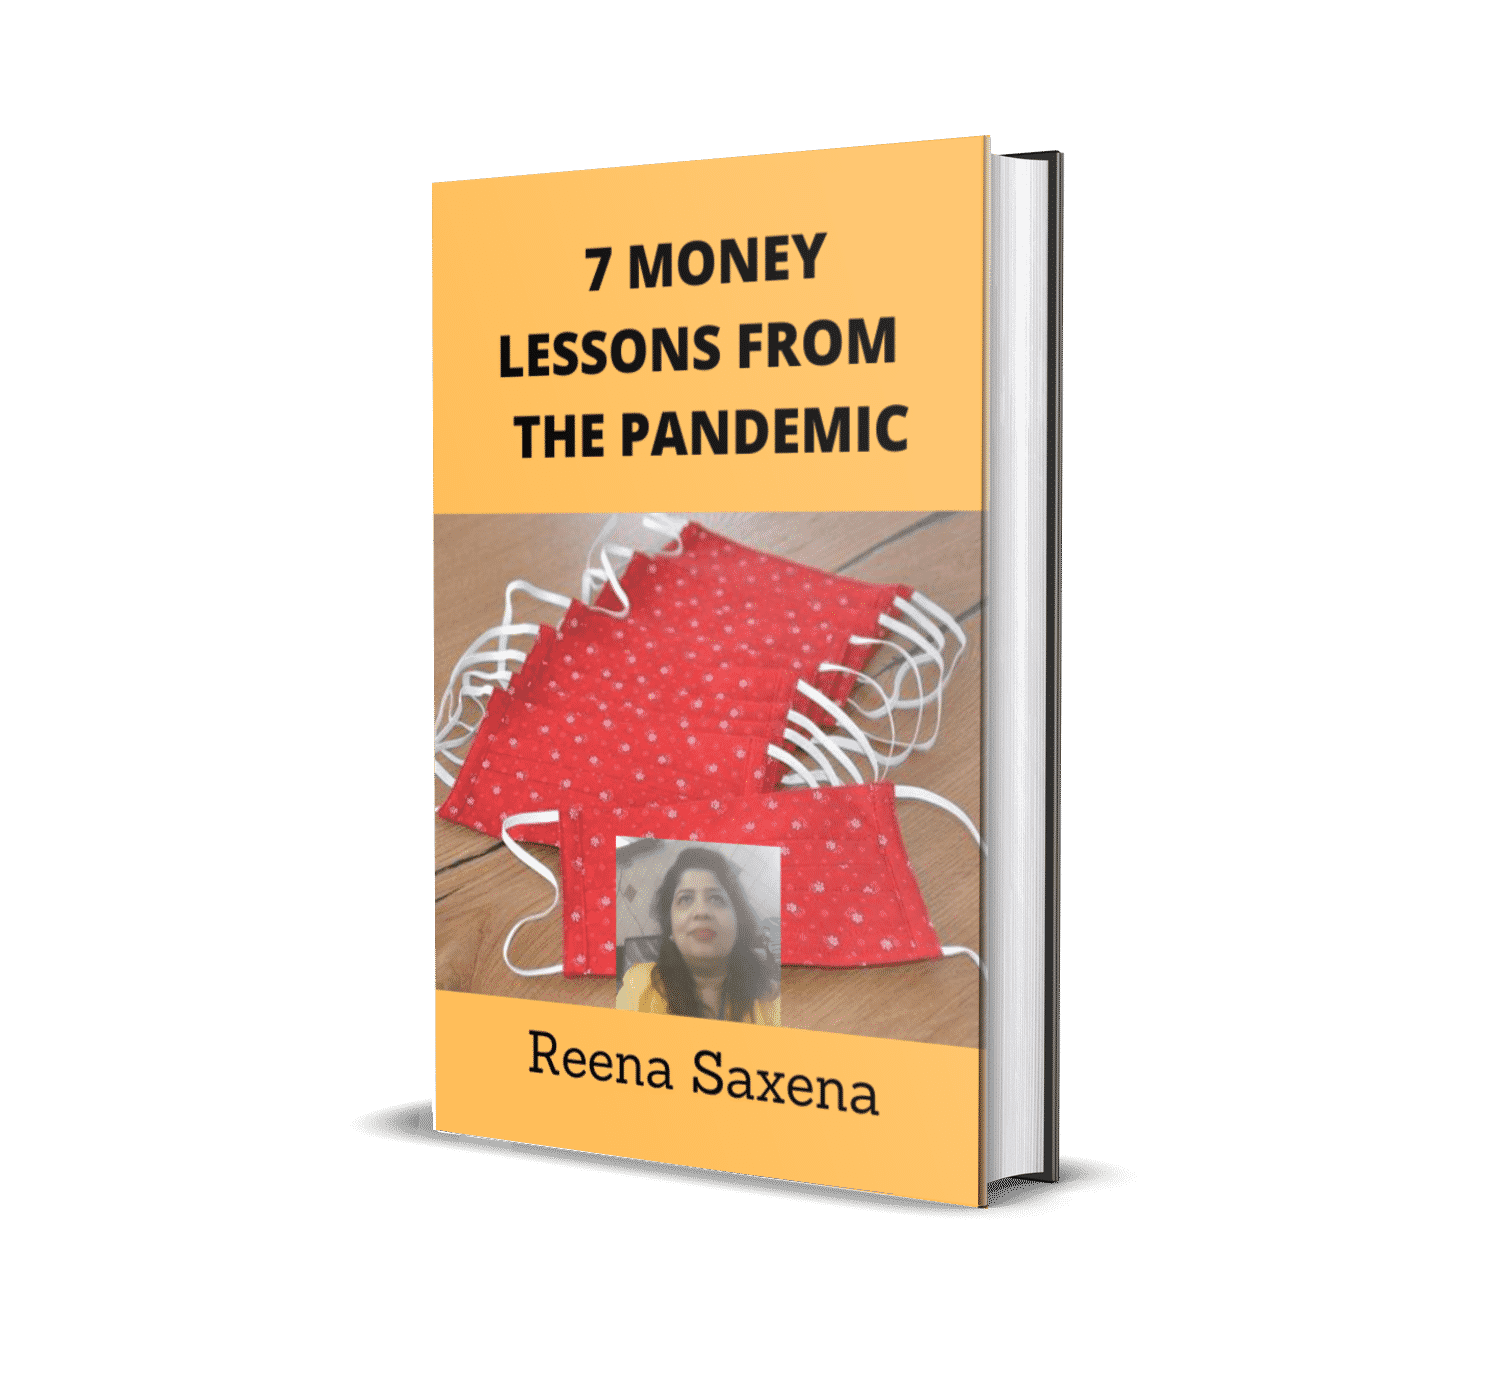 7 Money Lessons from Pandemic